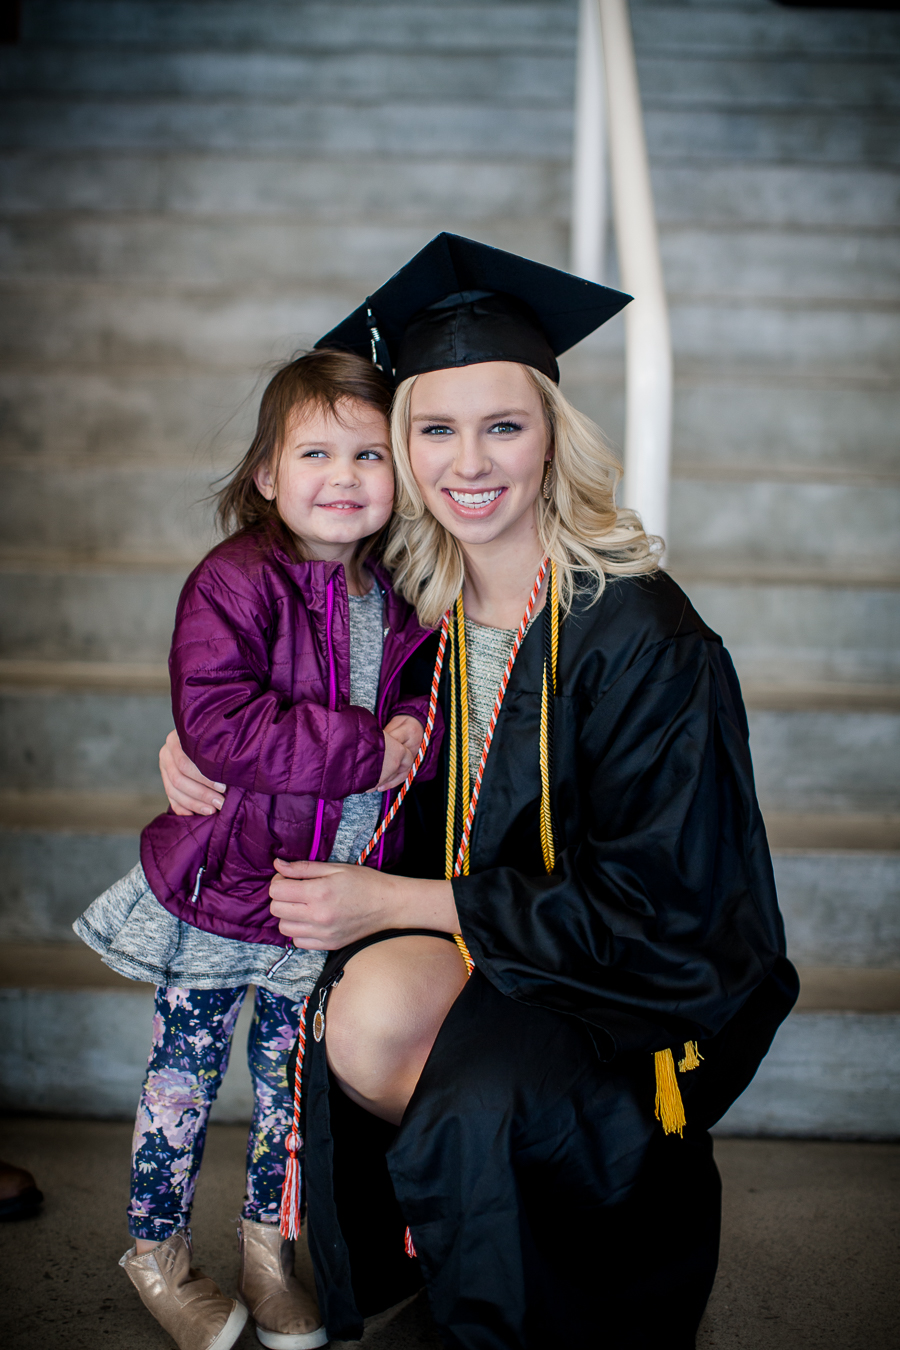 Graduate and her little niece at this University of Tennessee graduation by Amanda May Photos.